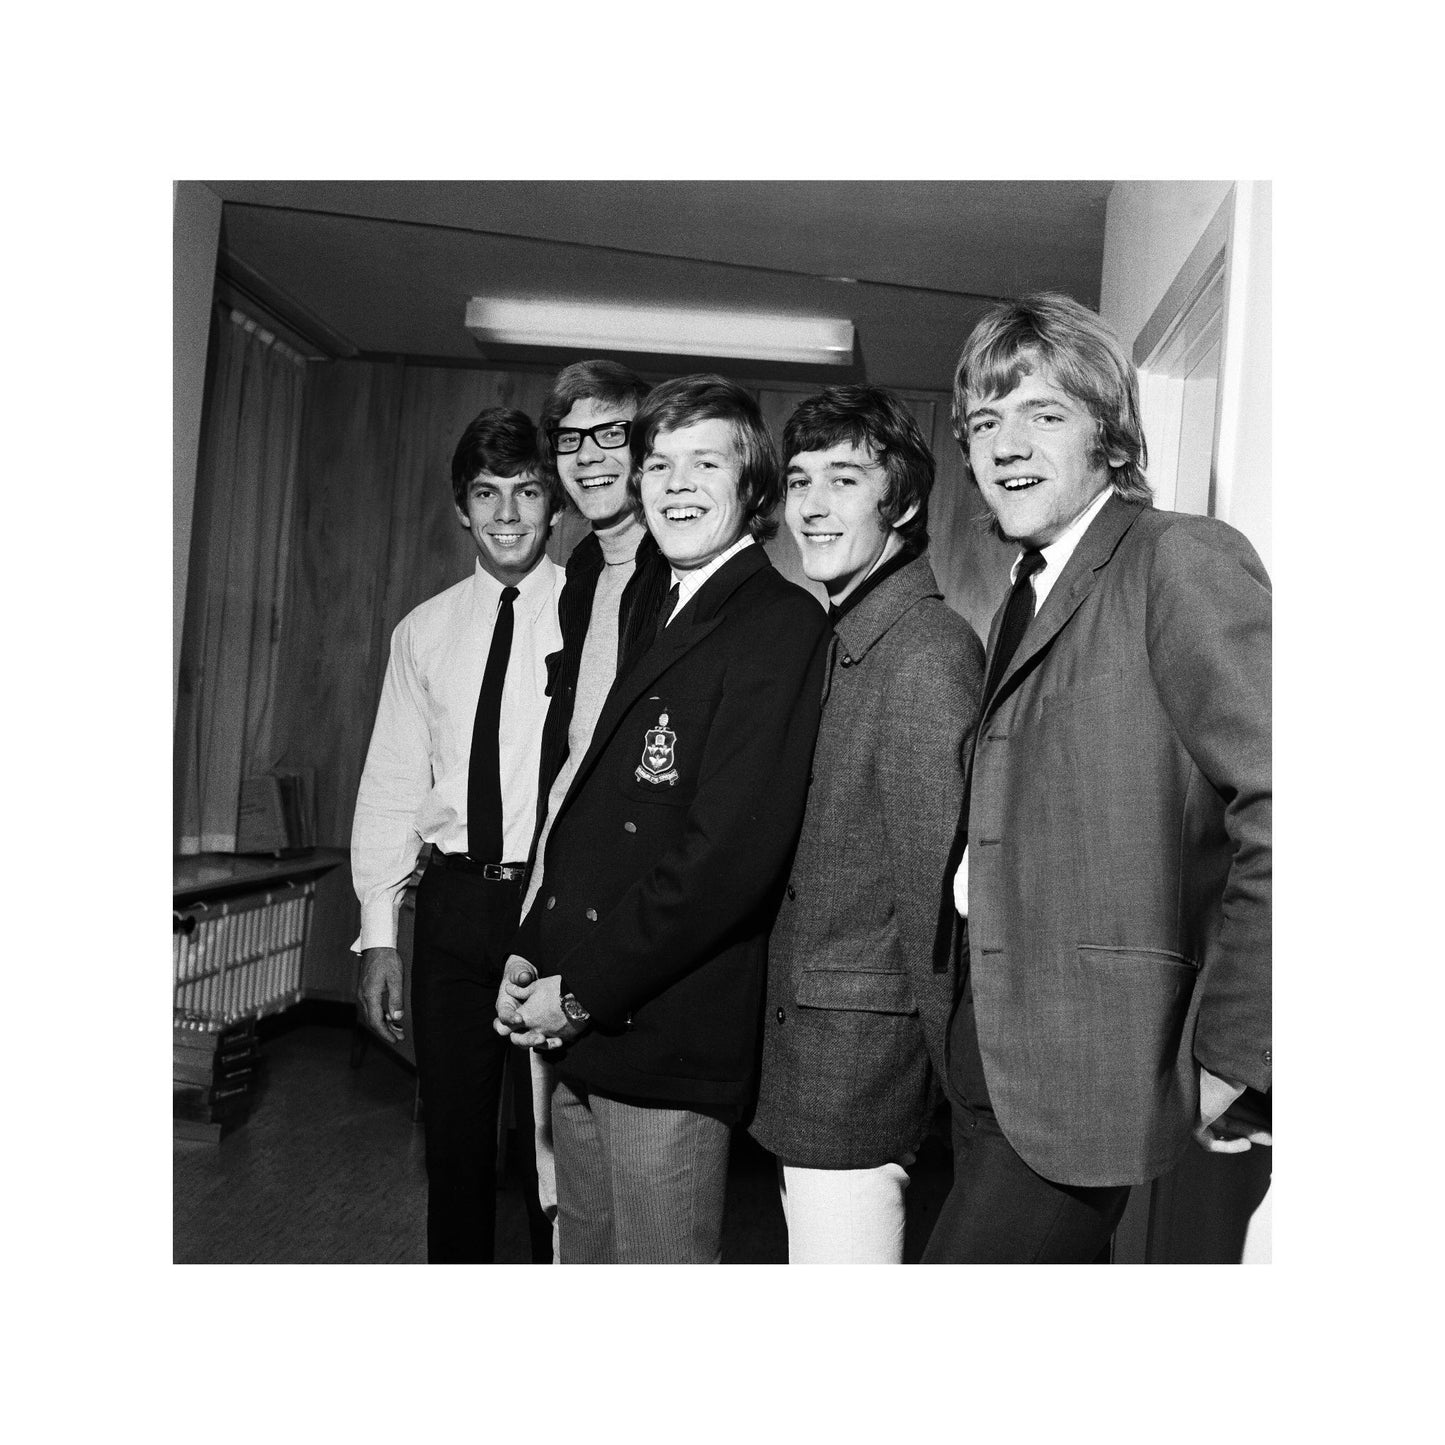 Herman's Hermits - After Signing Their MGM Contract, 1966 Print